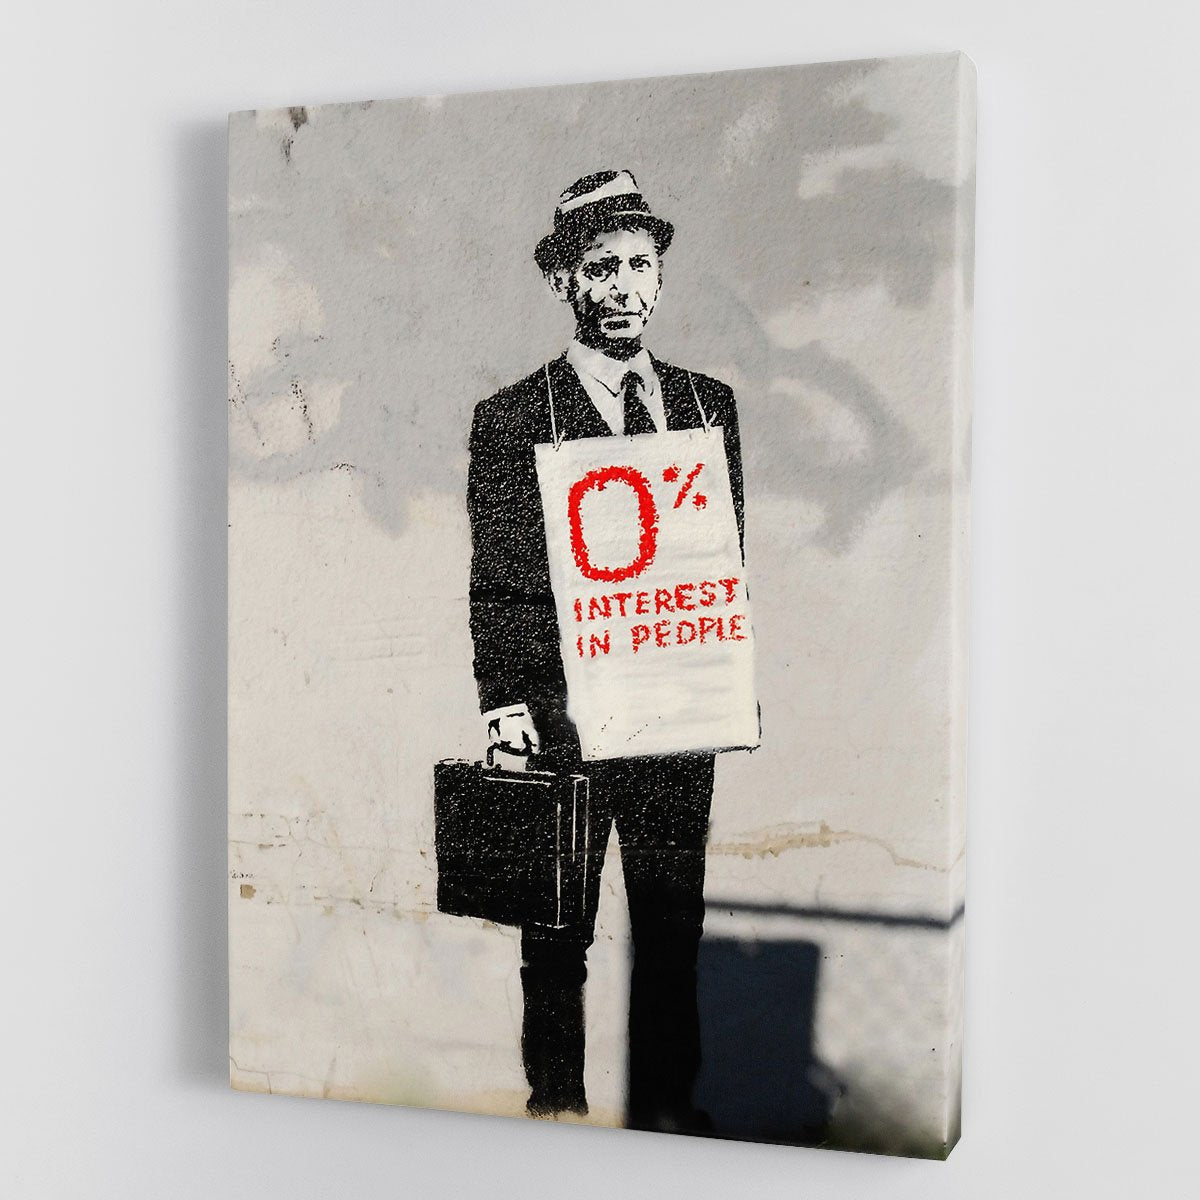 Banksy Zero Per Cent Interest in People Canvas Print or Poster